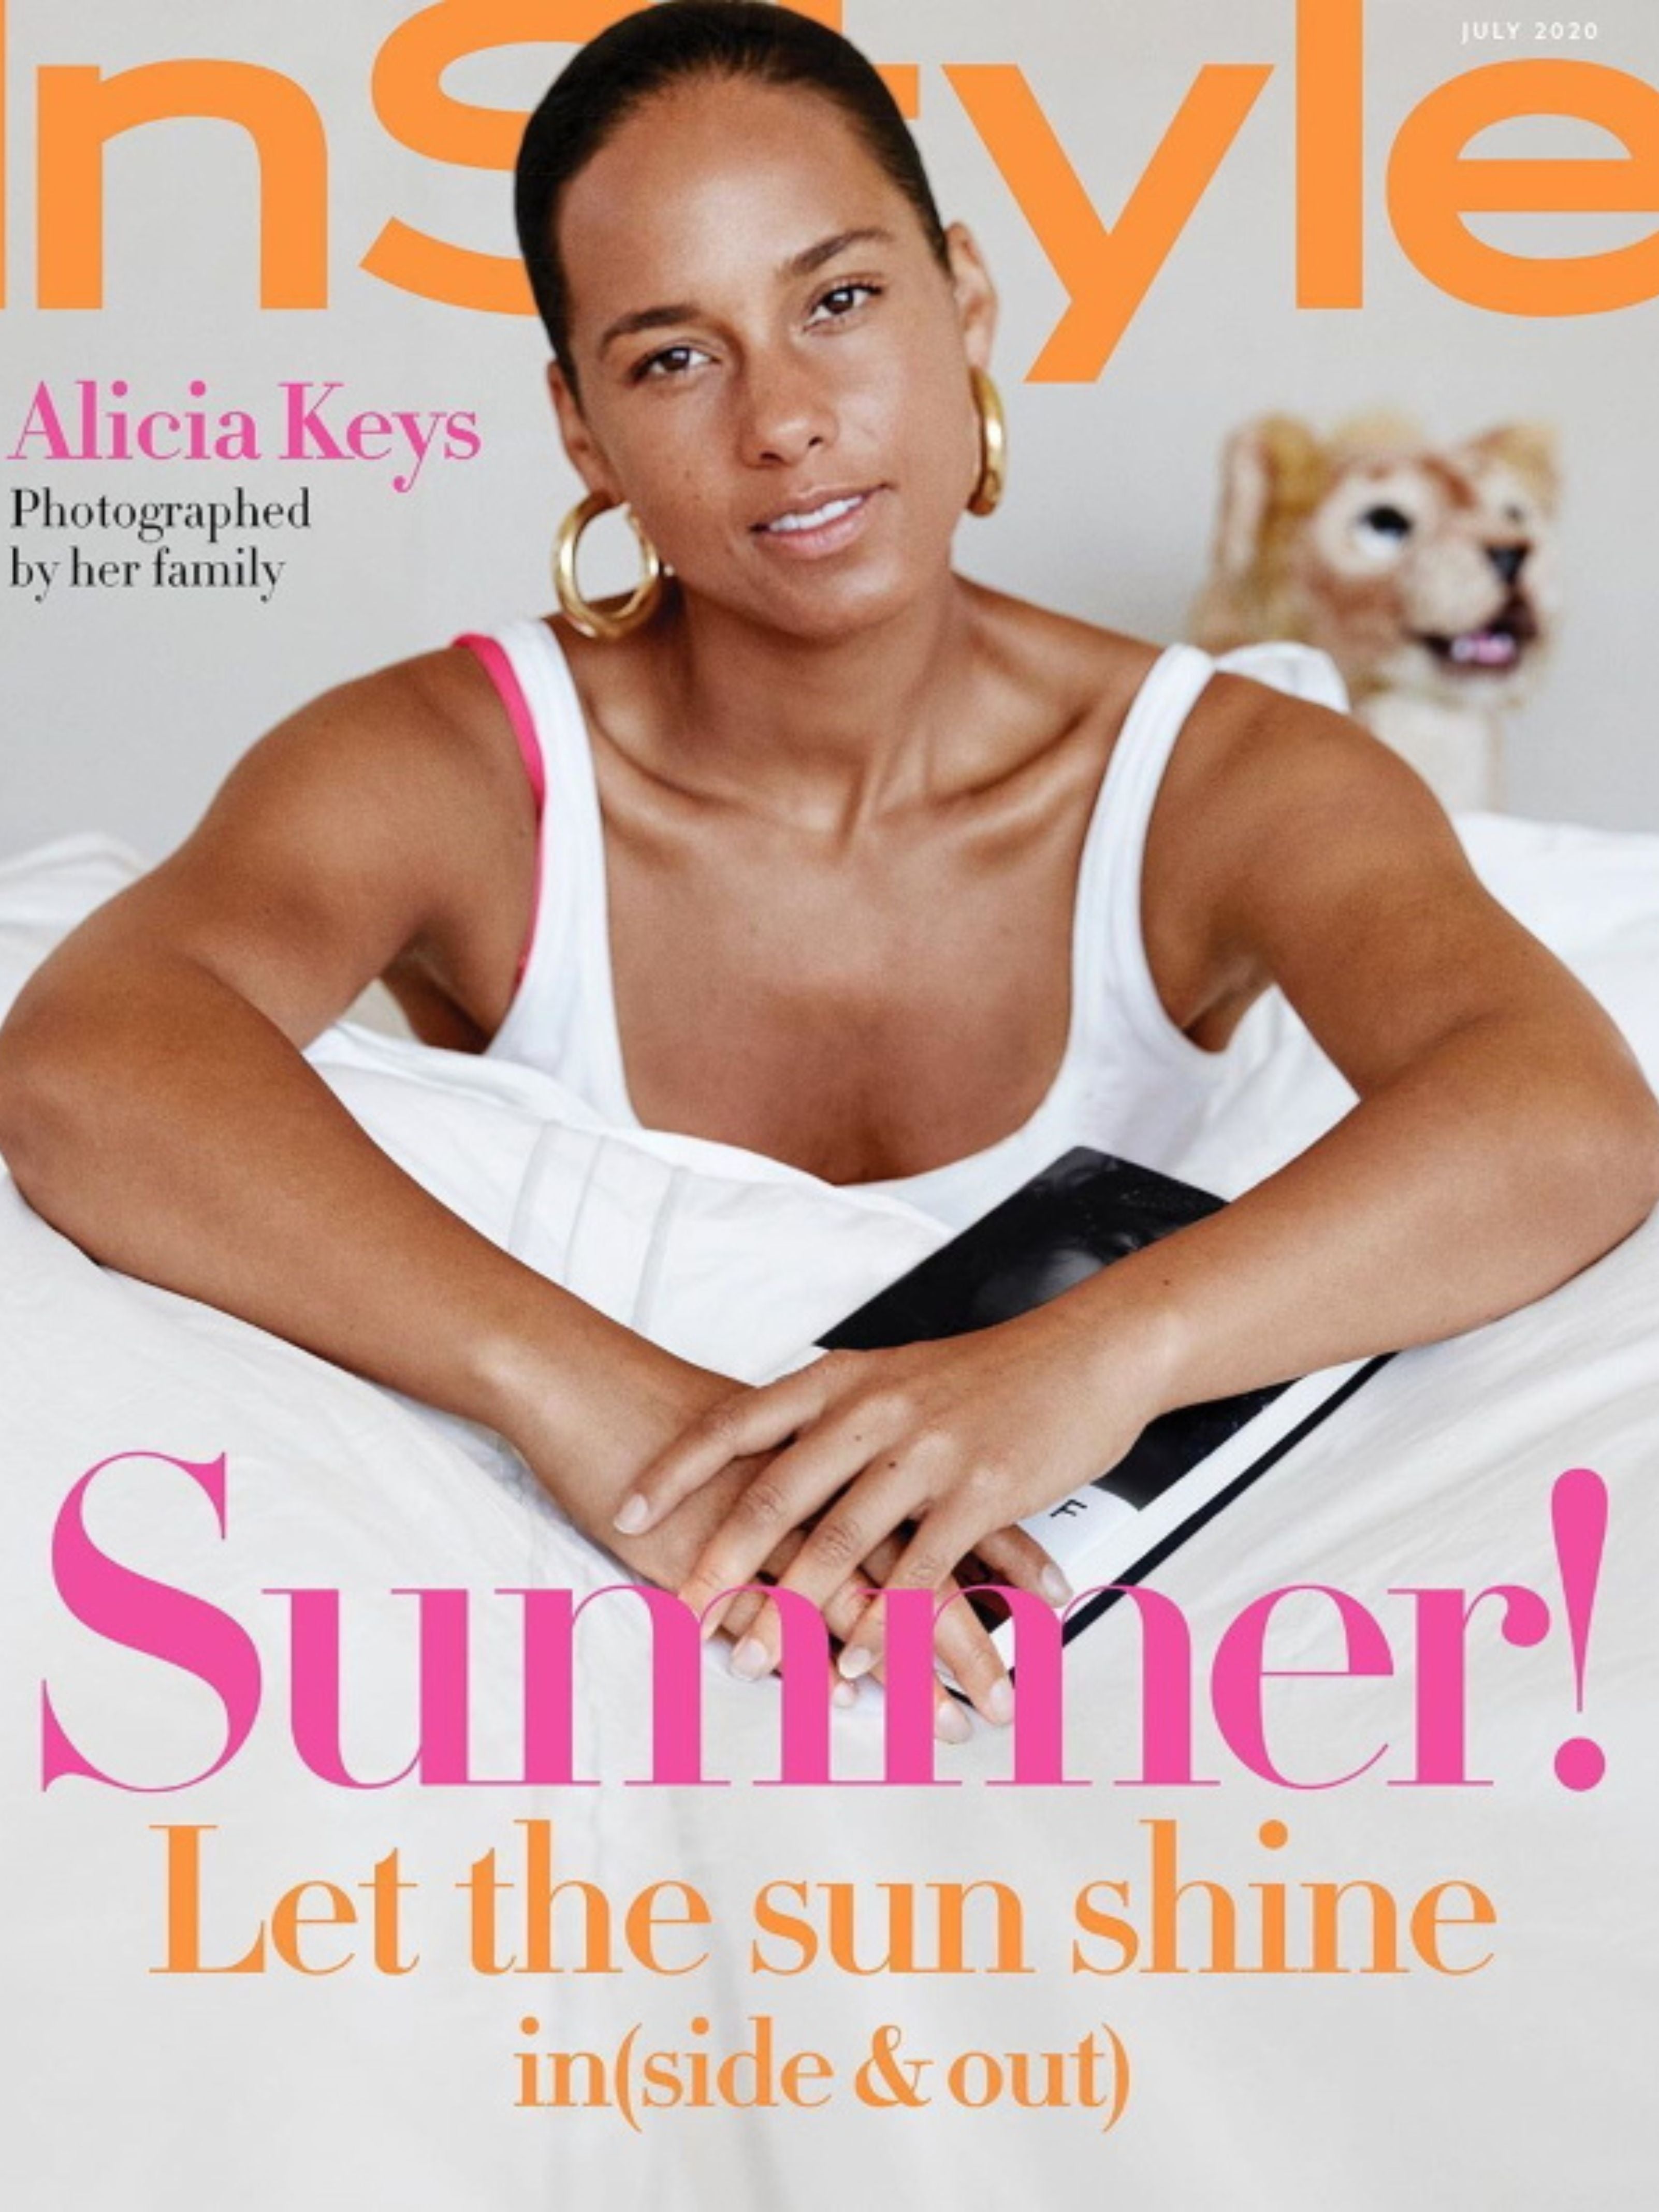 Alicia Keys wearing our Alice demi bra in Neon Pink on the cover of In Style Magazine